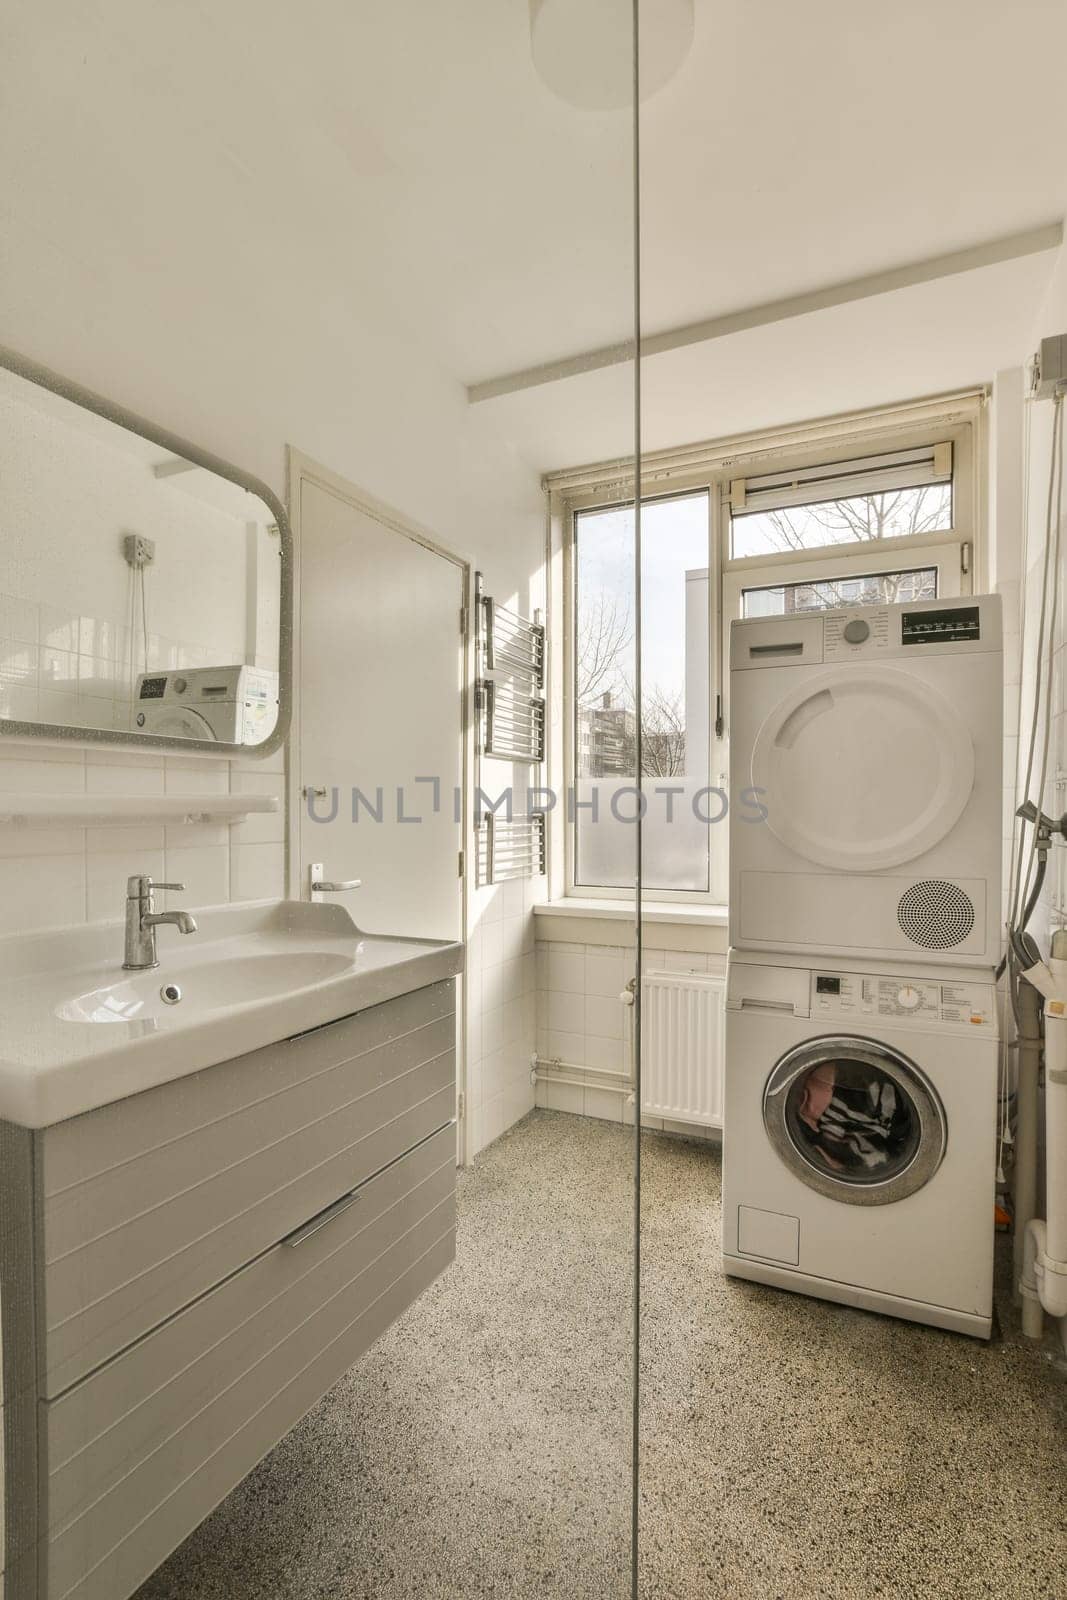 a laundry room with a washer and dryer in the corner, next to a window that looks out onto the street